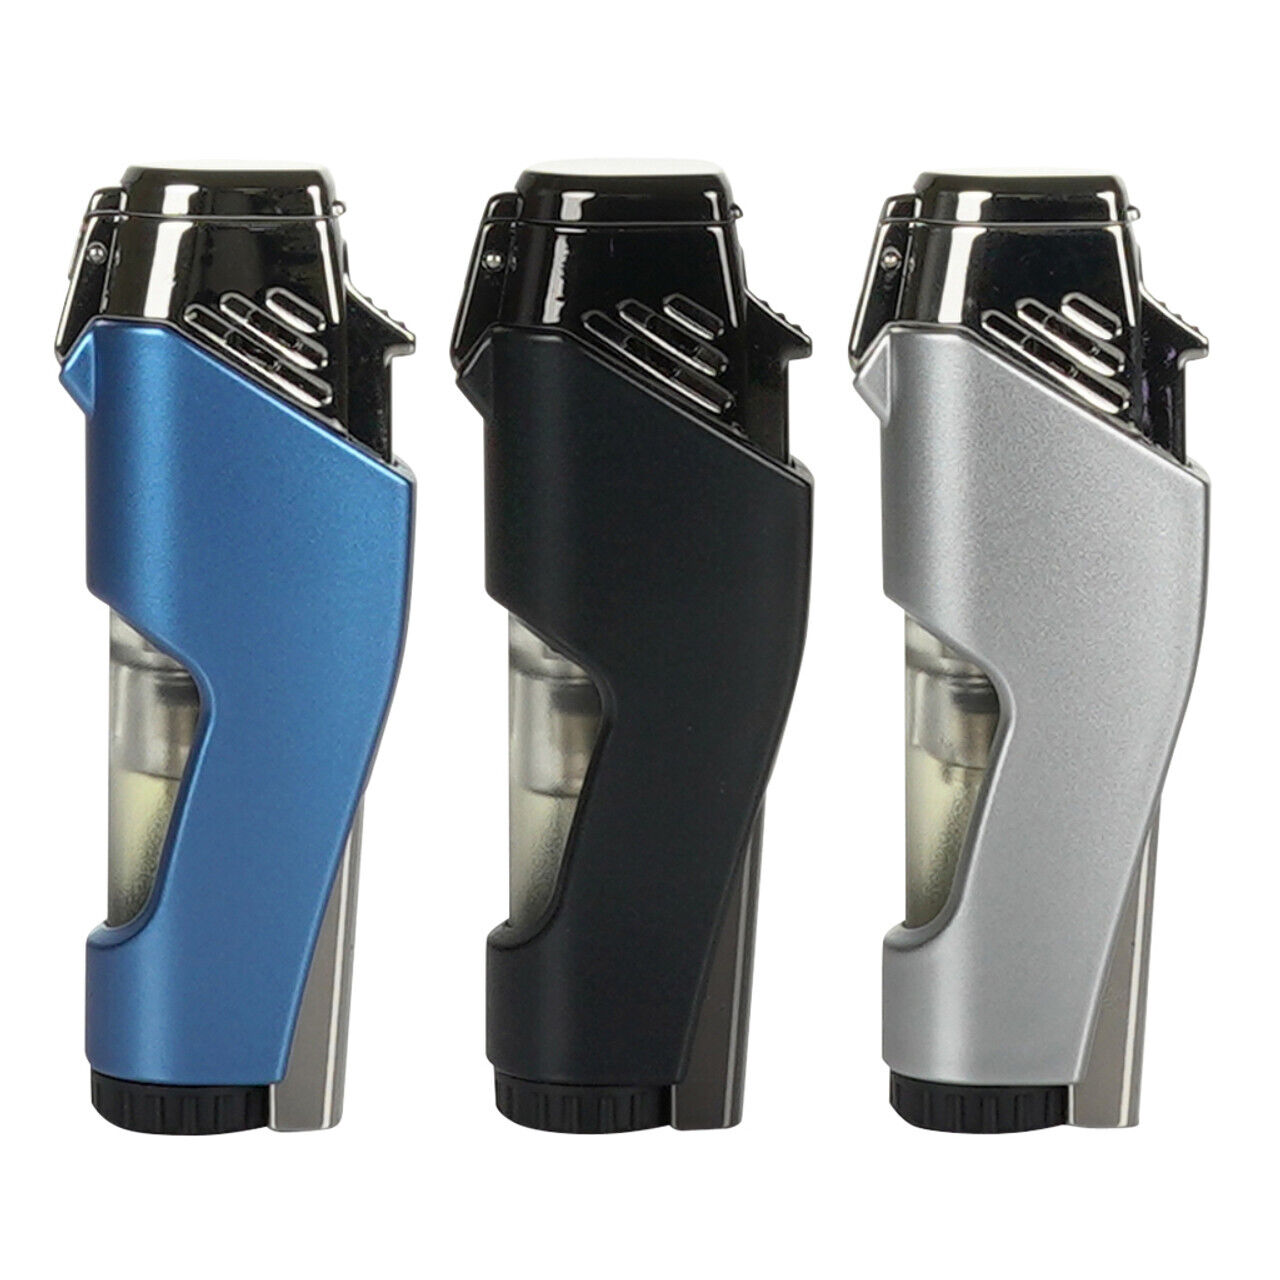 Zico ZD 81 Double Flame Torch Lighter   - CHOOSE COLOR 